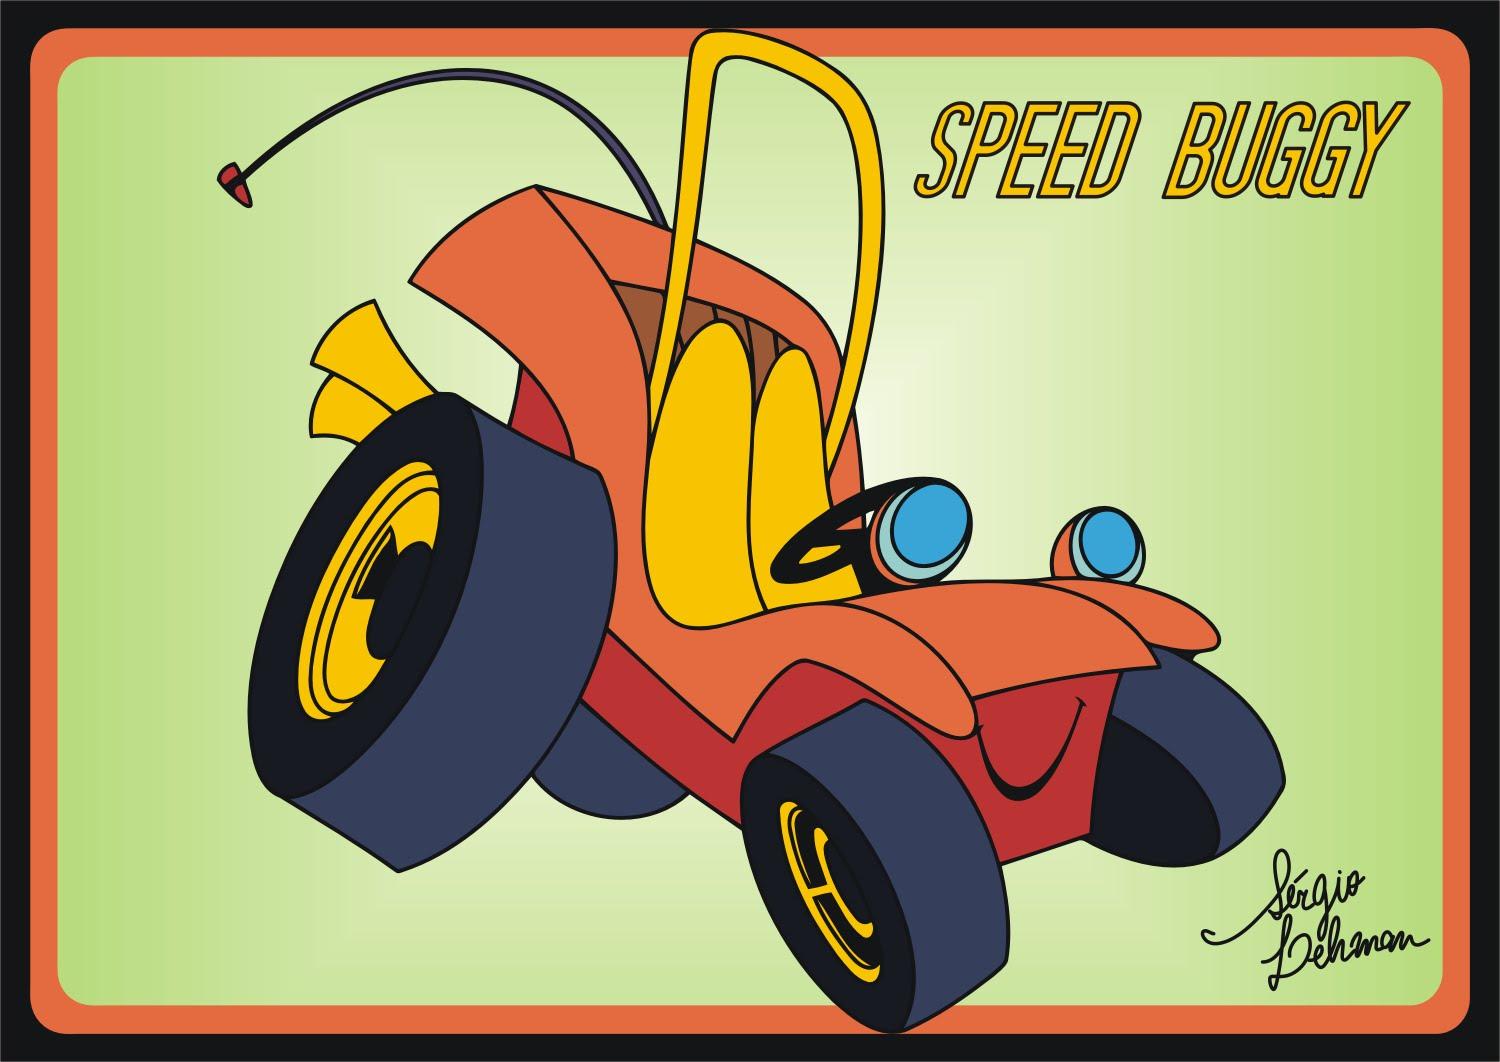 Speed Buggy (Chispinha)